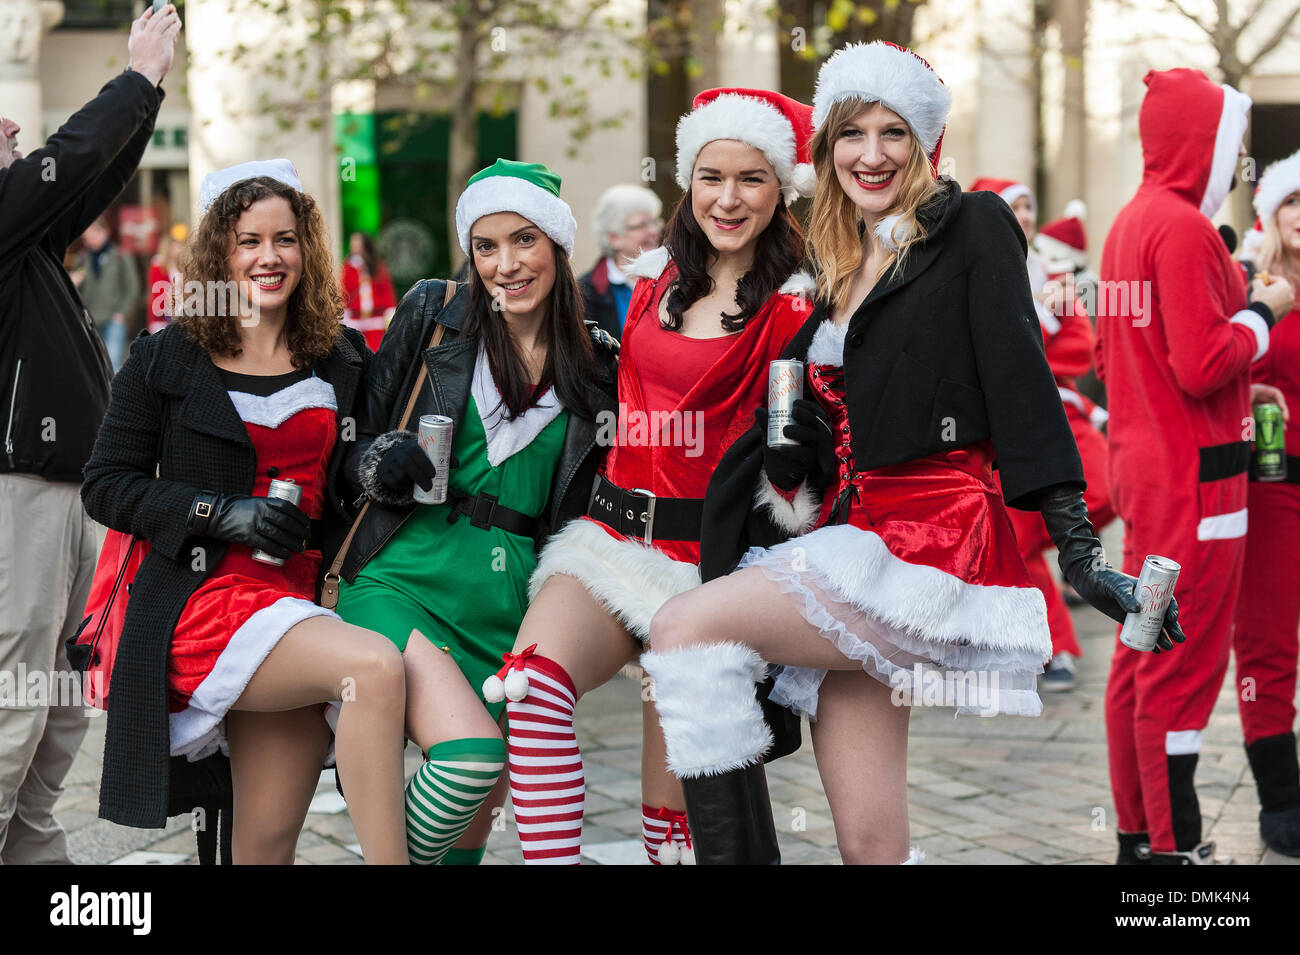 London, UK. 14th December, 2013.  Four girls having fun at this year's Santacon.  Hundreds of Santas gather on the steps of St Pauls Cathedral before they march off to meet up with groups of other Santas to celebrate the annual Santacon.  Photographer: Gordon Scammell/Alamy Live News Stock Photo